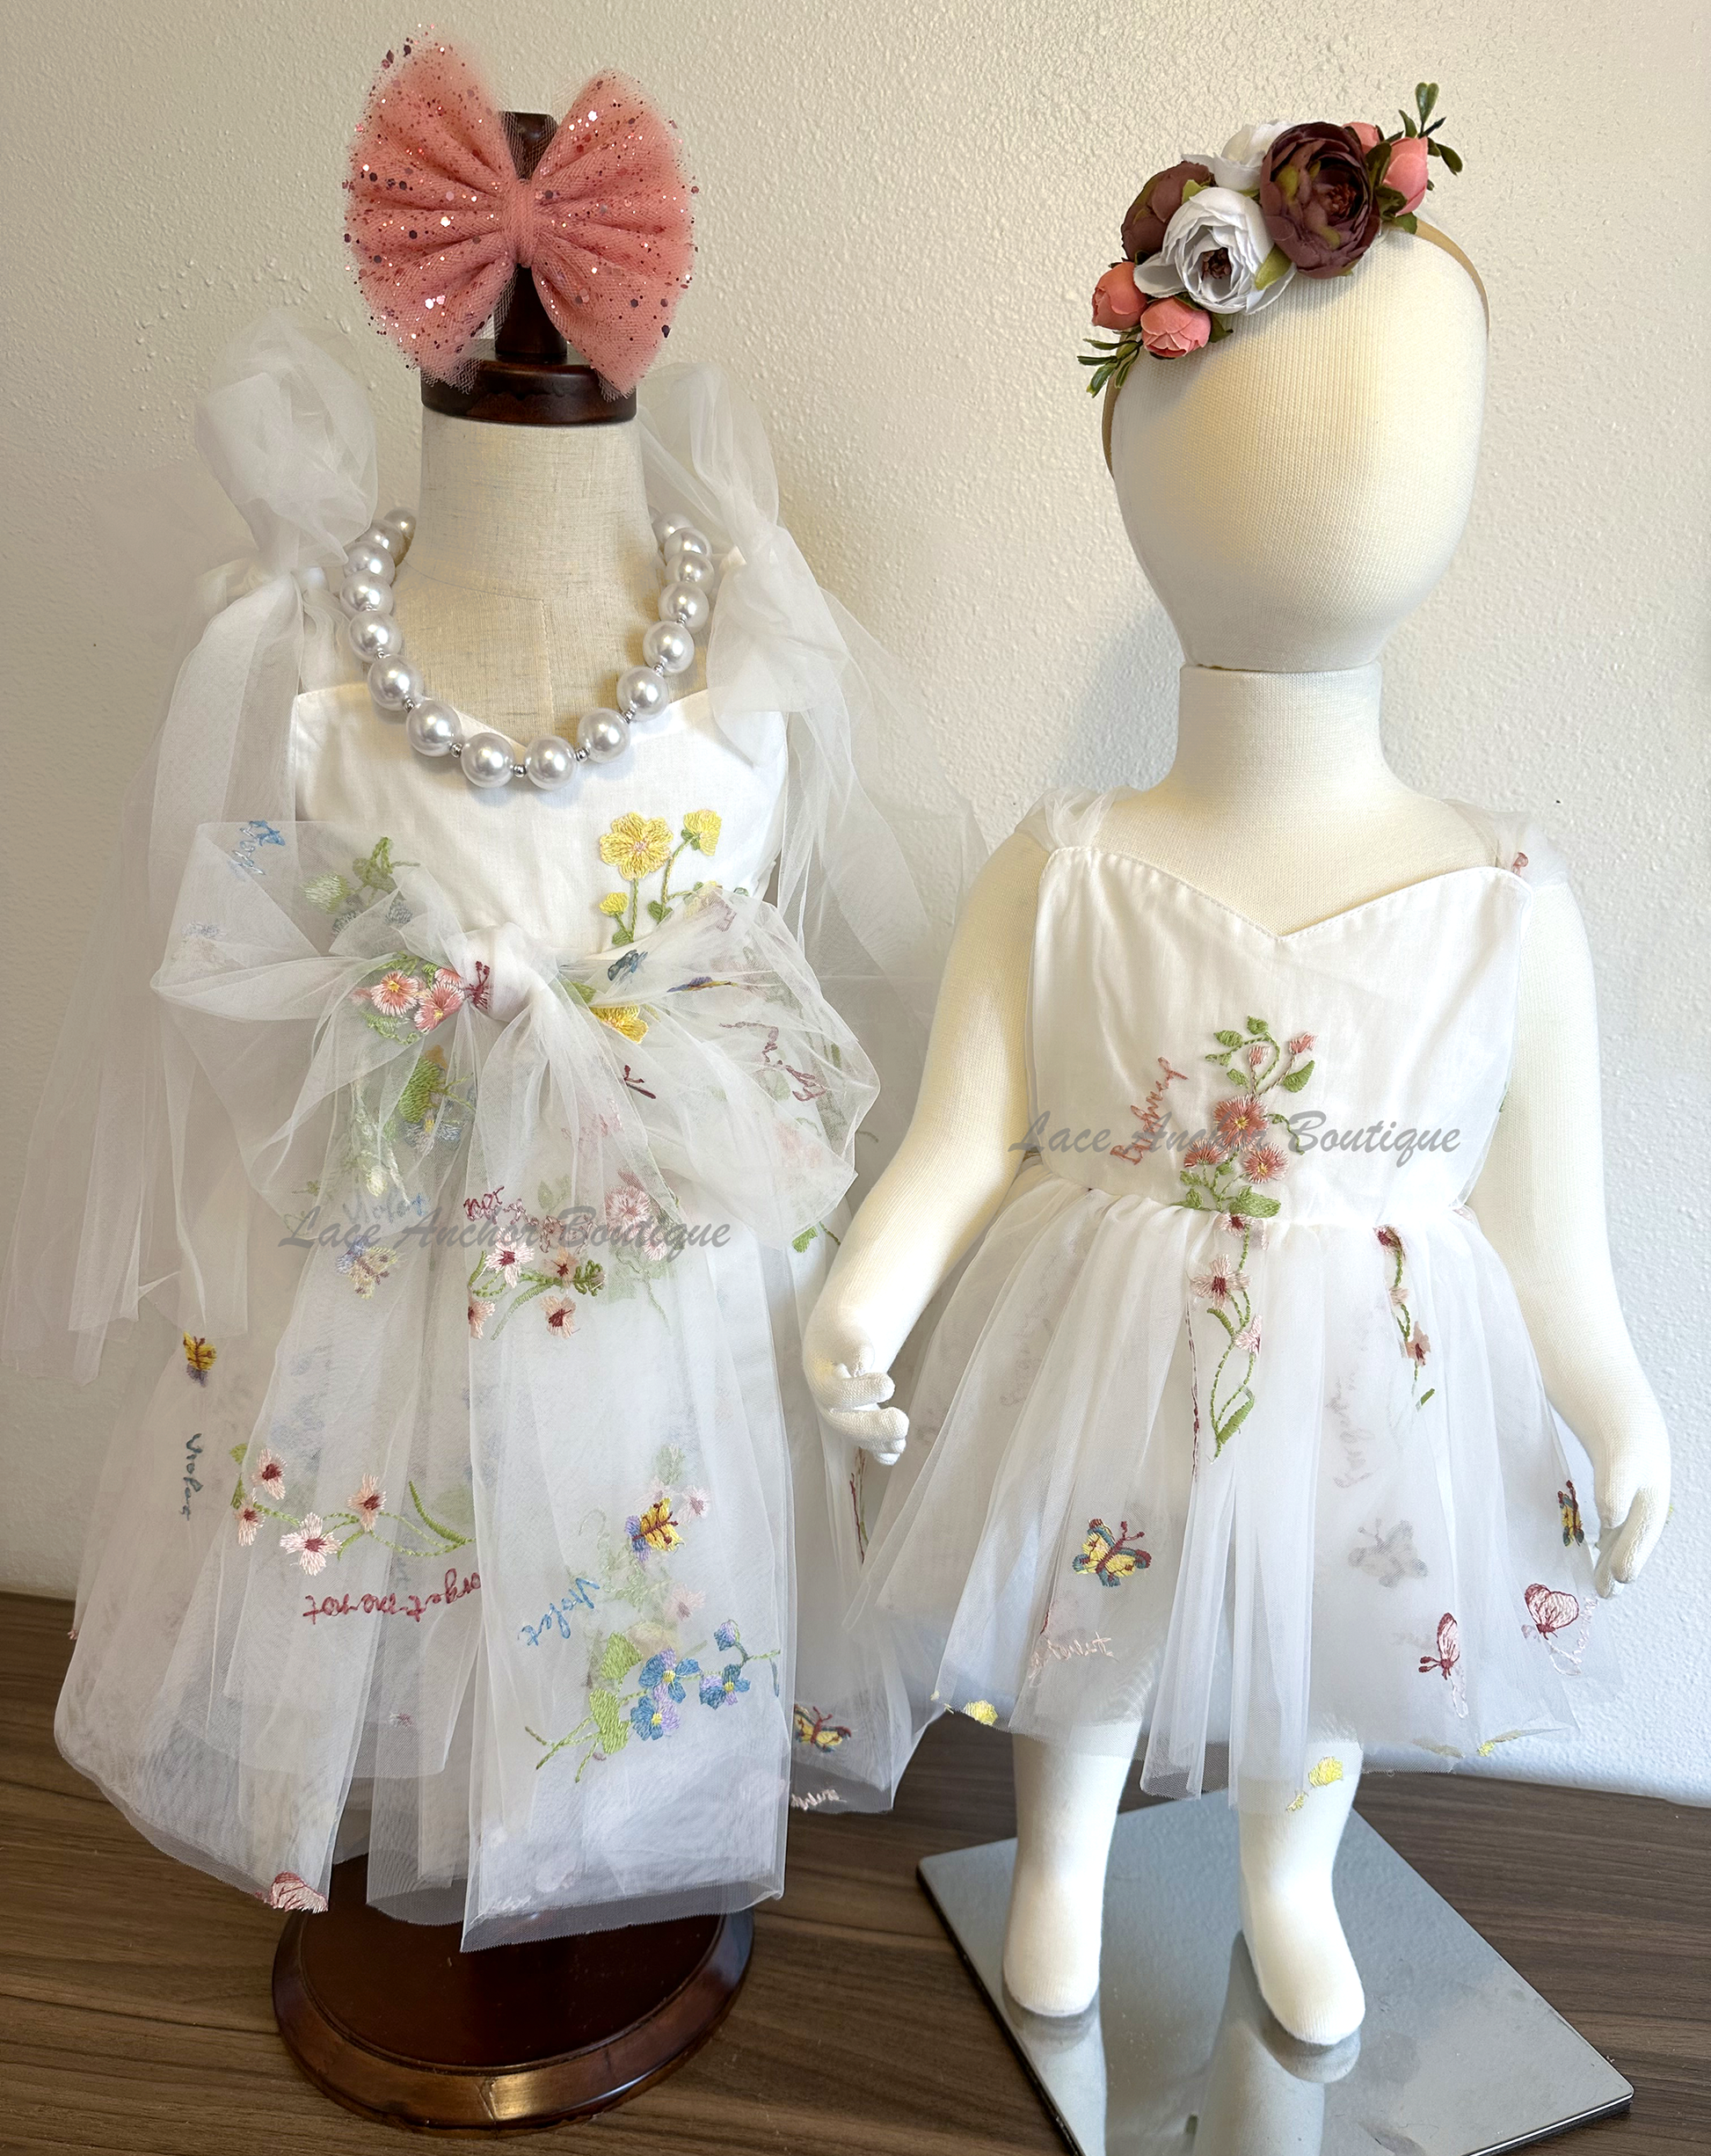 toddler youth puffy tied shoulder flower girl dress with large tied bow tied at waist. Baby girls romper with tied back fluffy bow. Outfits in white with embroidered floral print.